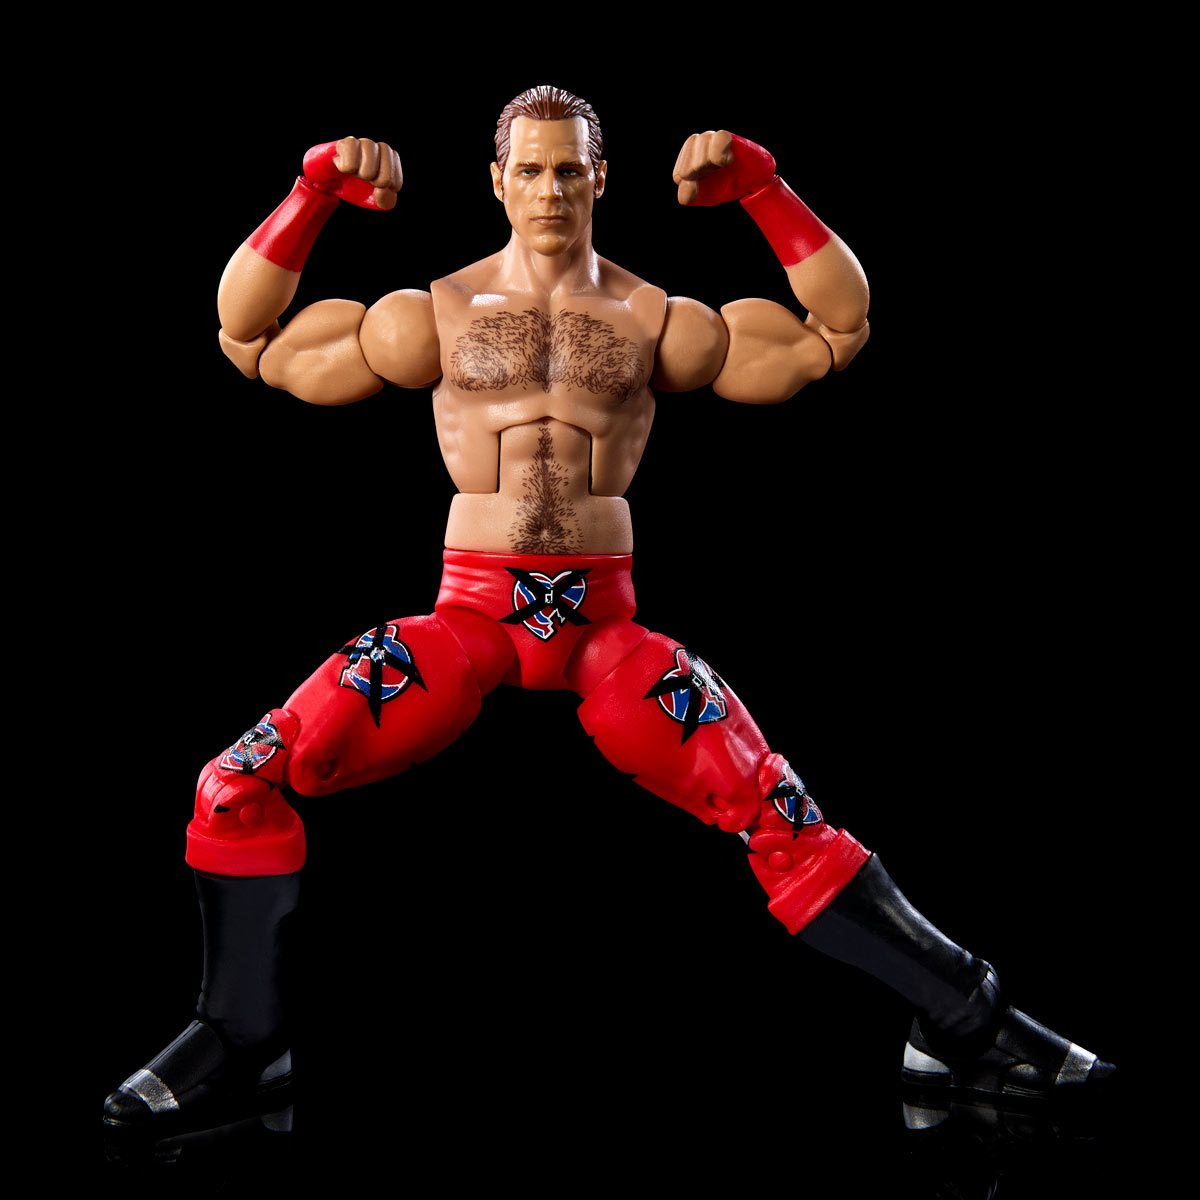 WWE Elite Collection Greatest Hits Shawn Michaels